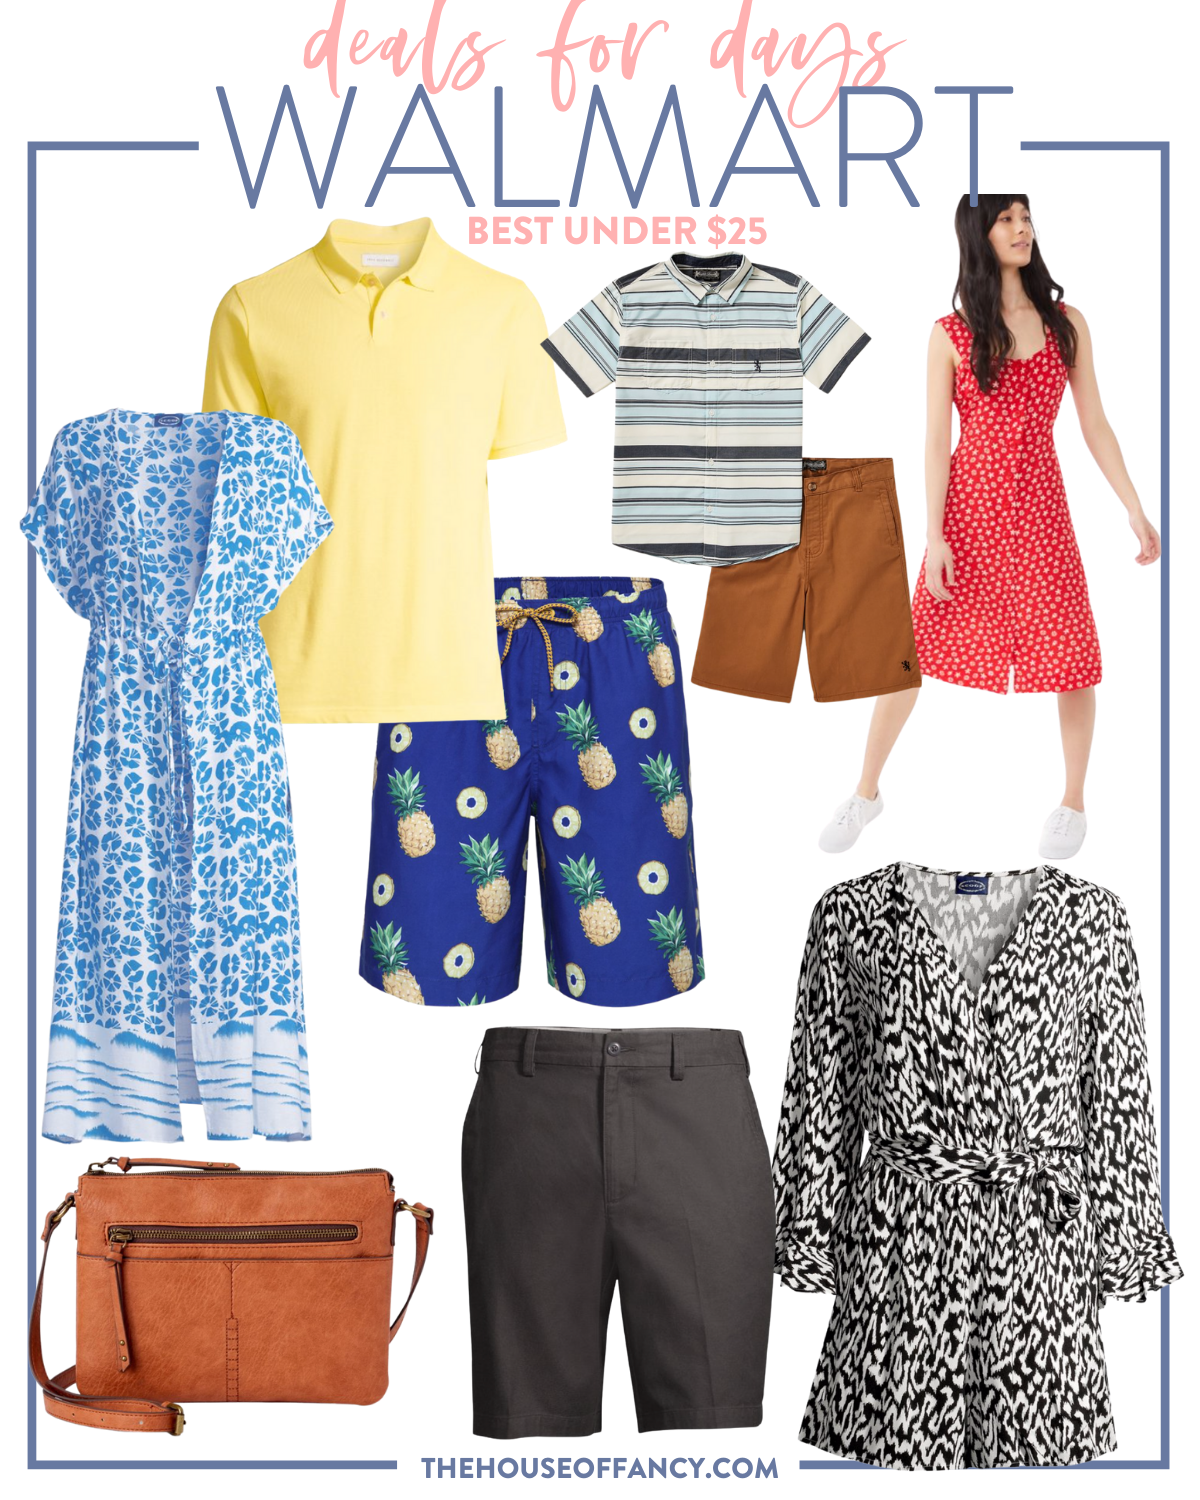 Walmart Deals for Days by popular Houston fashion blog, The House of Fancy: collage image of blue and white print dusters, pineapple print swimsuit, yellow polo, brown shorts, blue, white, and cream stripe button up shirt, red and white floral print midi skirt, brown crossbody bag, and black and white print dress. 